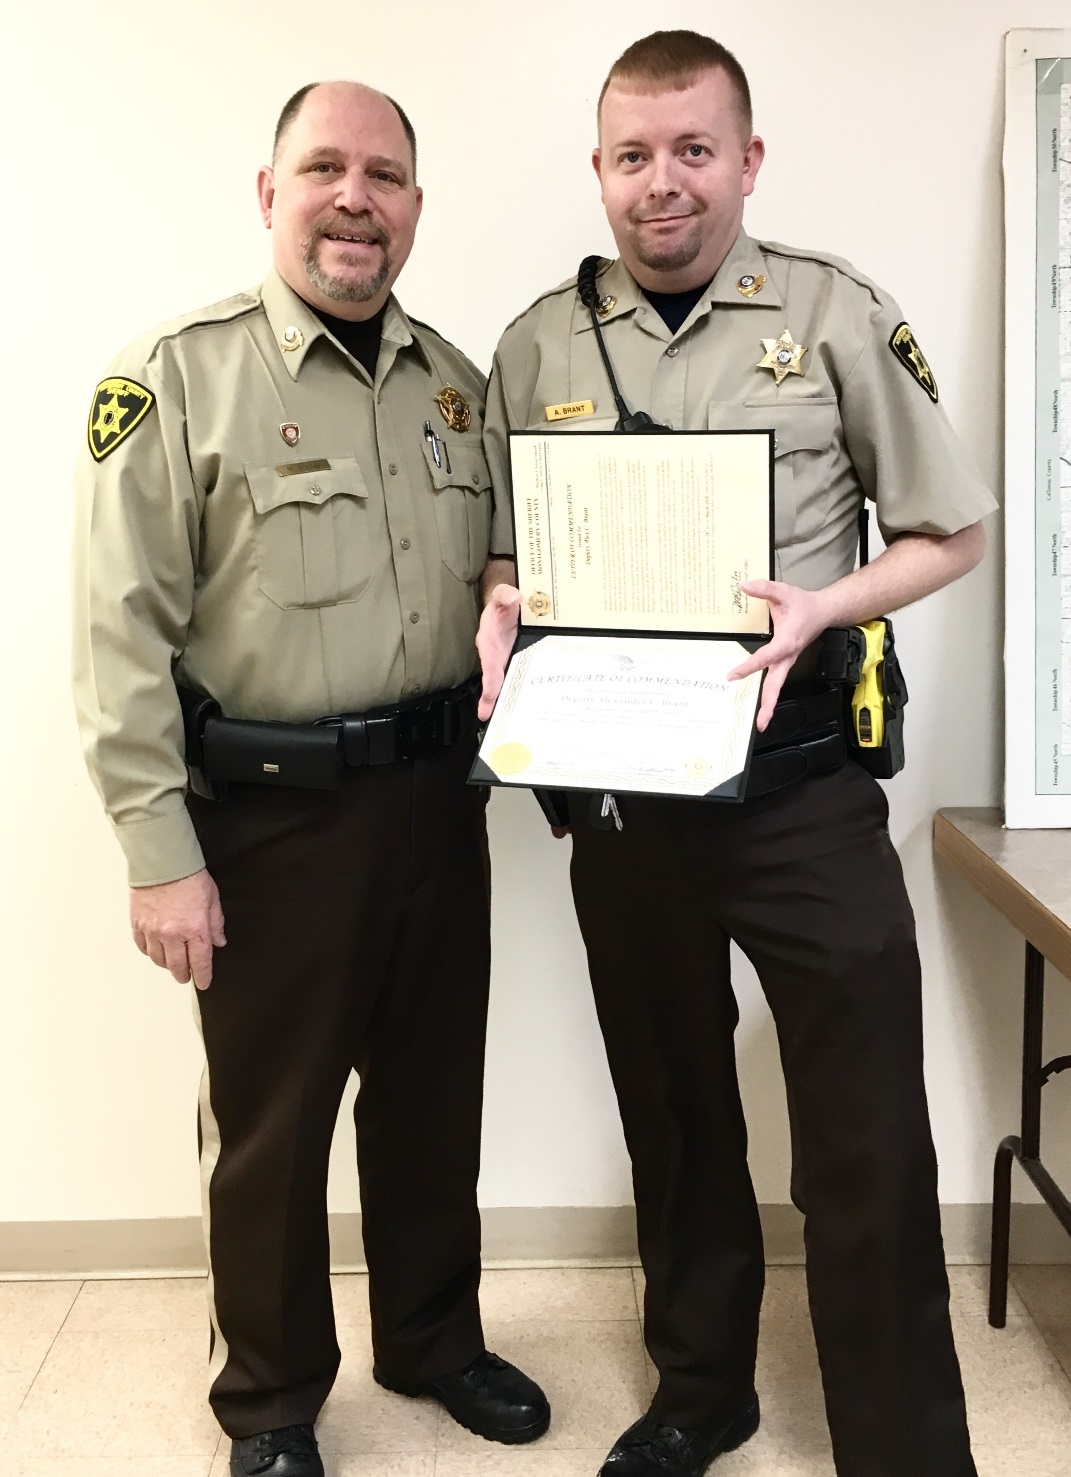 Montgomery County Deputy Given Commendation For Life Saving Efforts